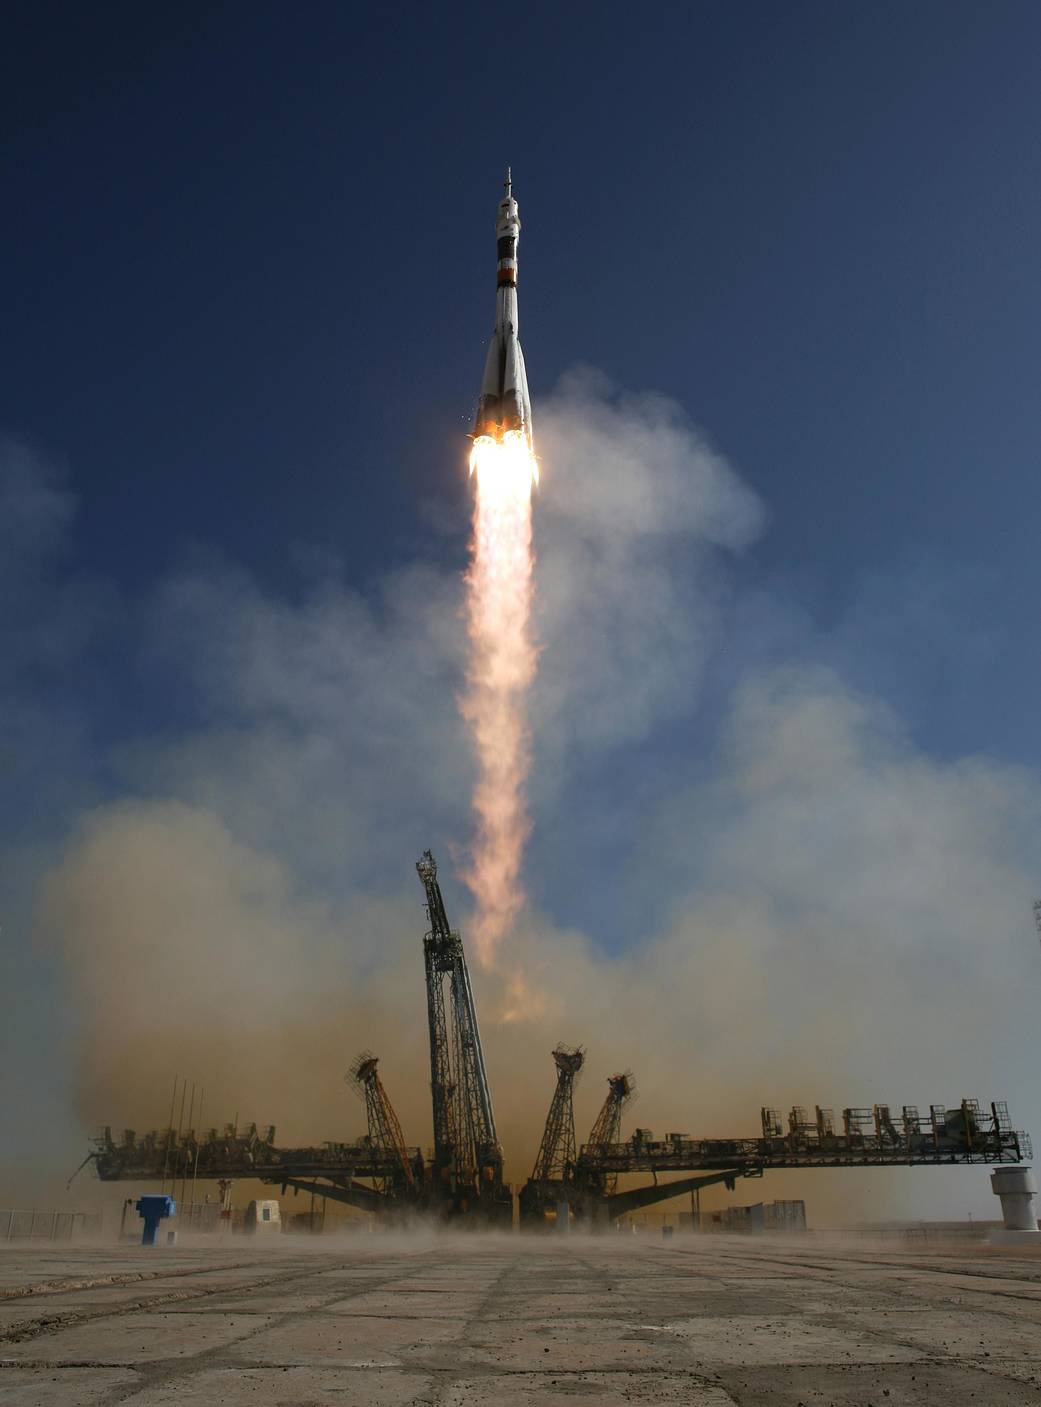 Launch of Soyuz rocket against dark blue sky with pulled back launch tower surrounding